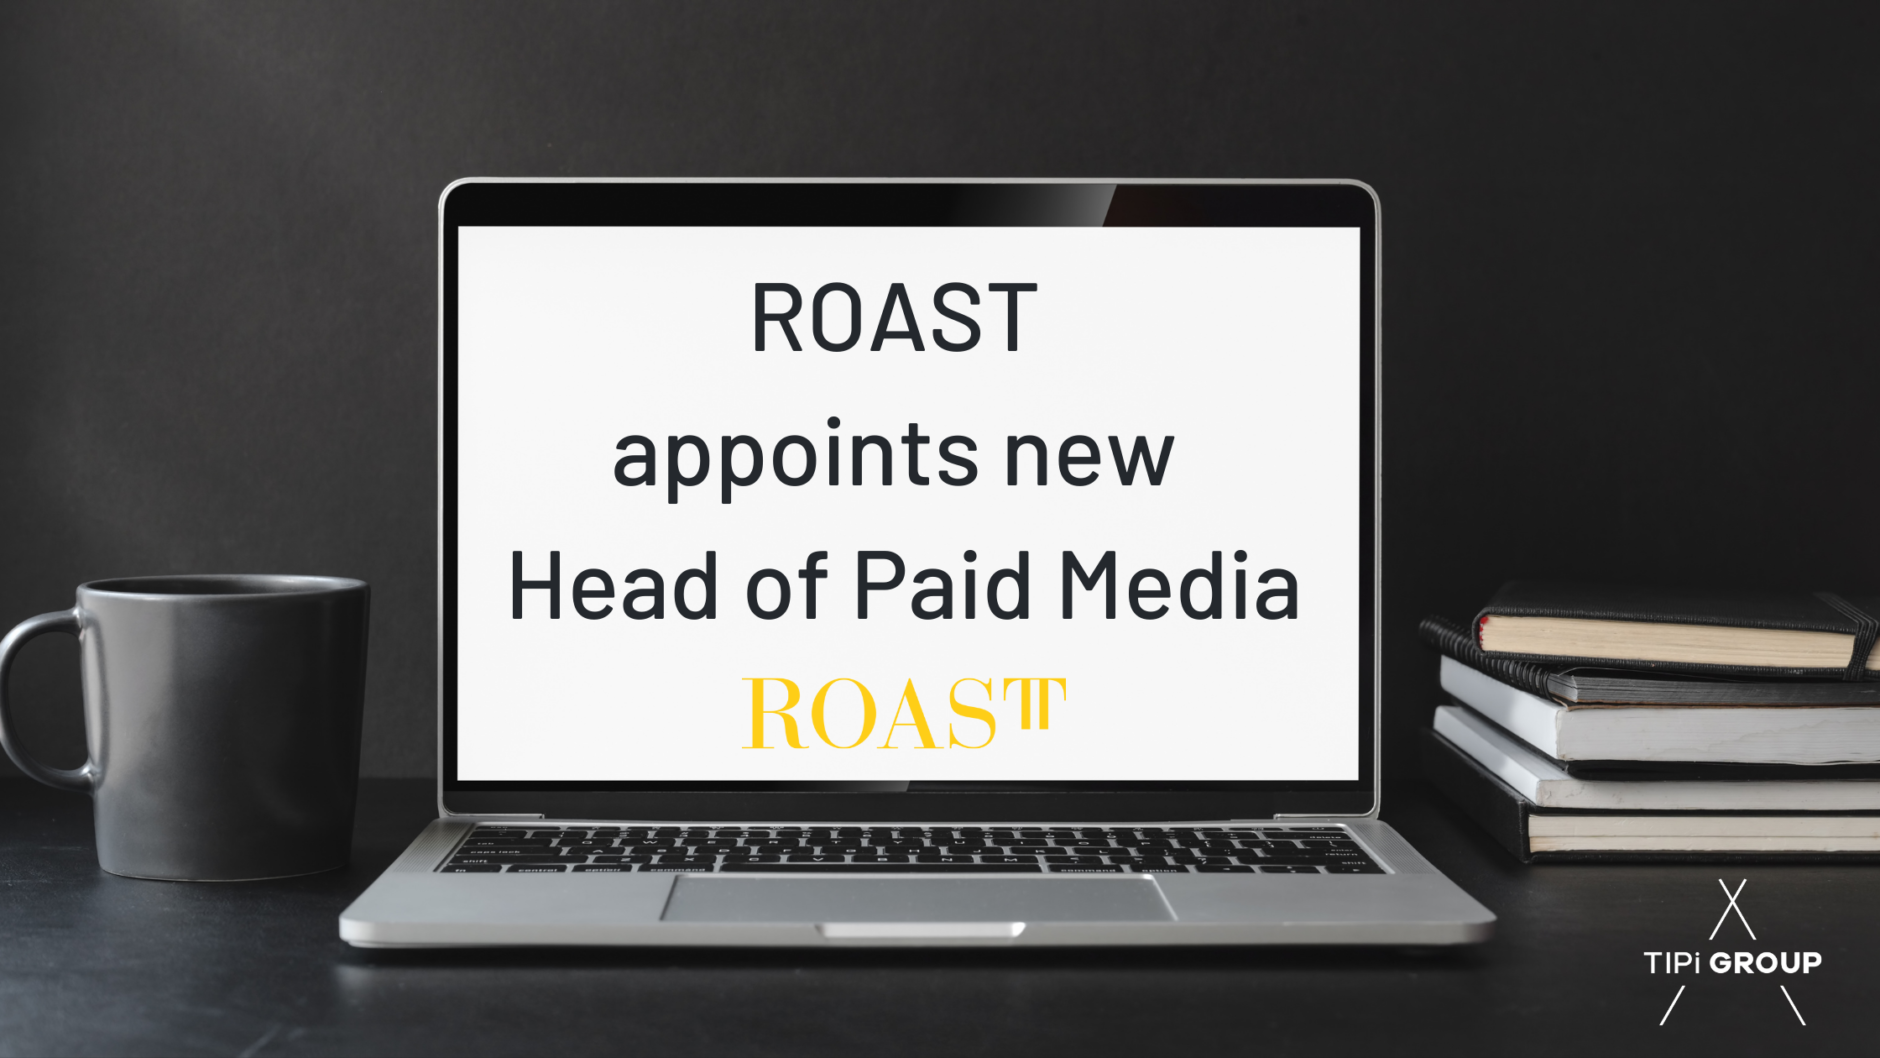 ROAST appoint ex-Jellyfish Will Jennings as Head of Paid Media